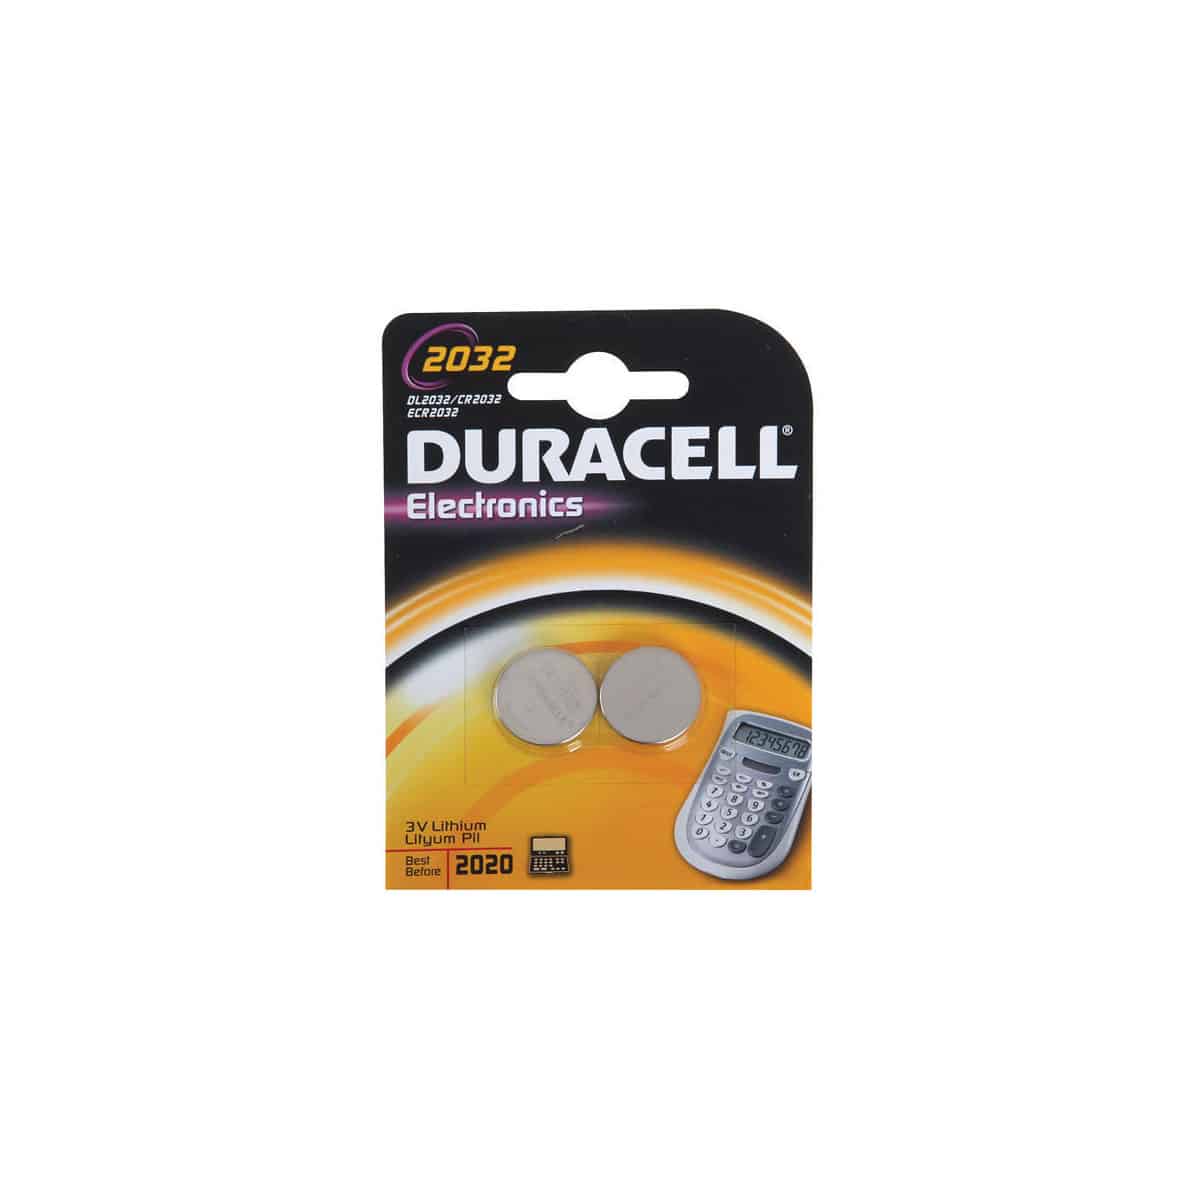 DURACELL : Piles bouton lithium - type 2032 (DL2032/CR2032) - chronodrive